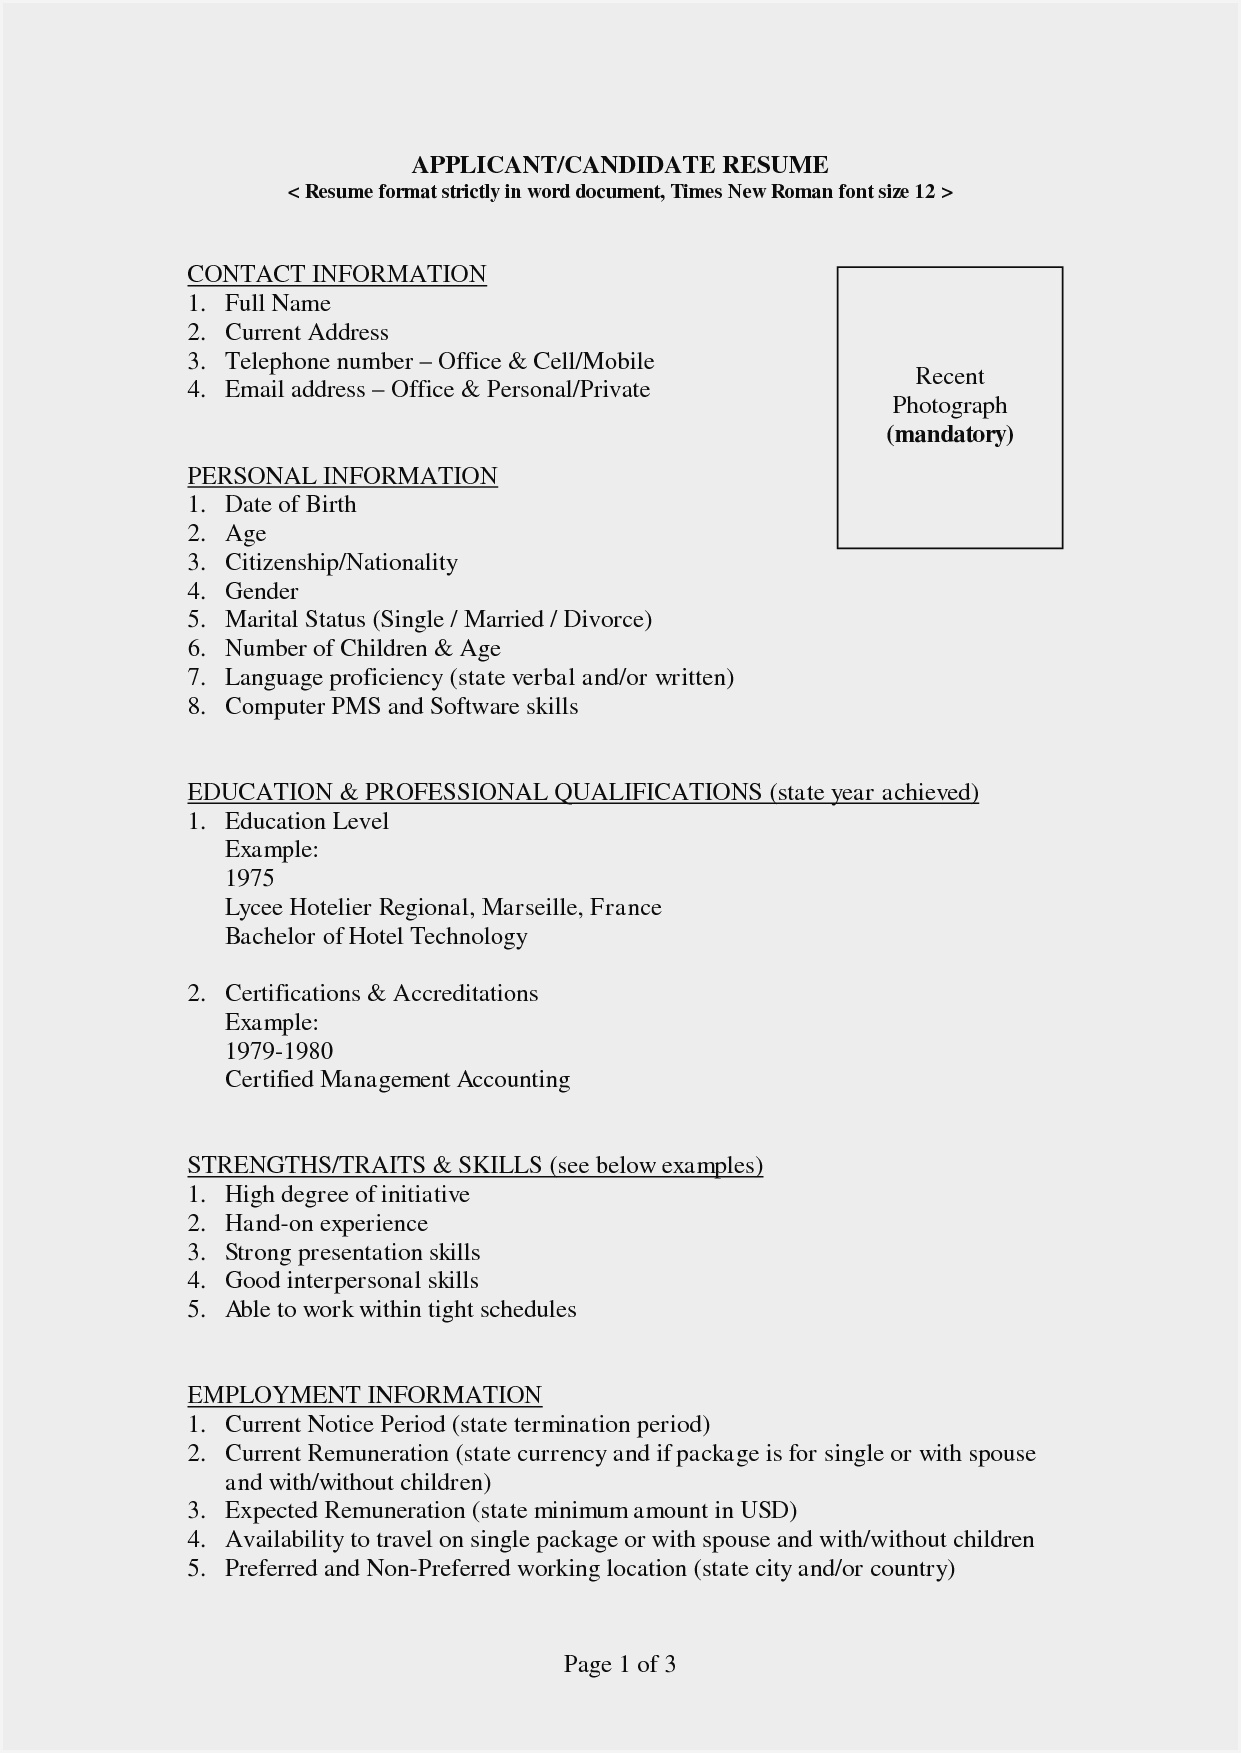 Resume Format Template For Word Download - Resume Sample Throughout Simple Resume Template Microsoft Word